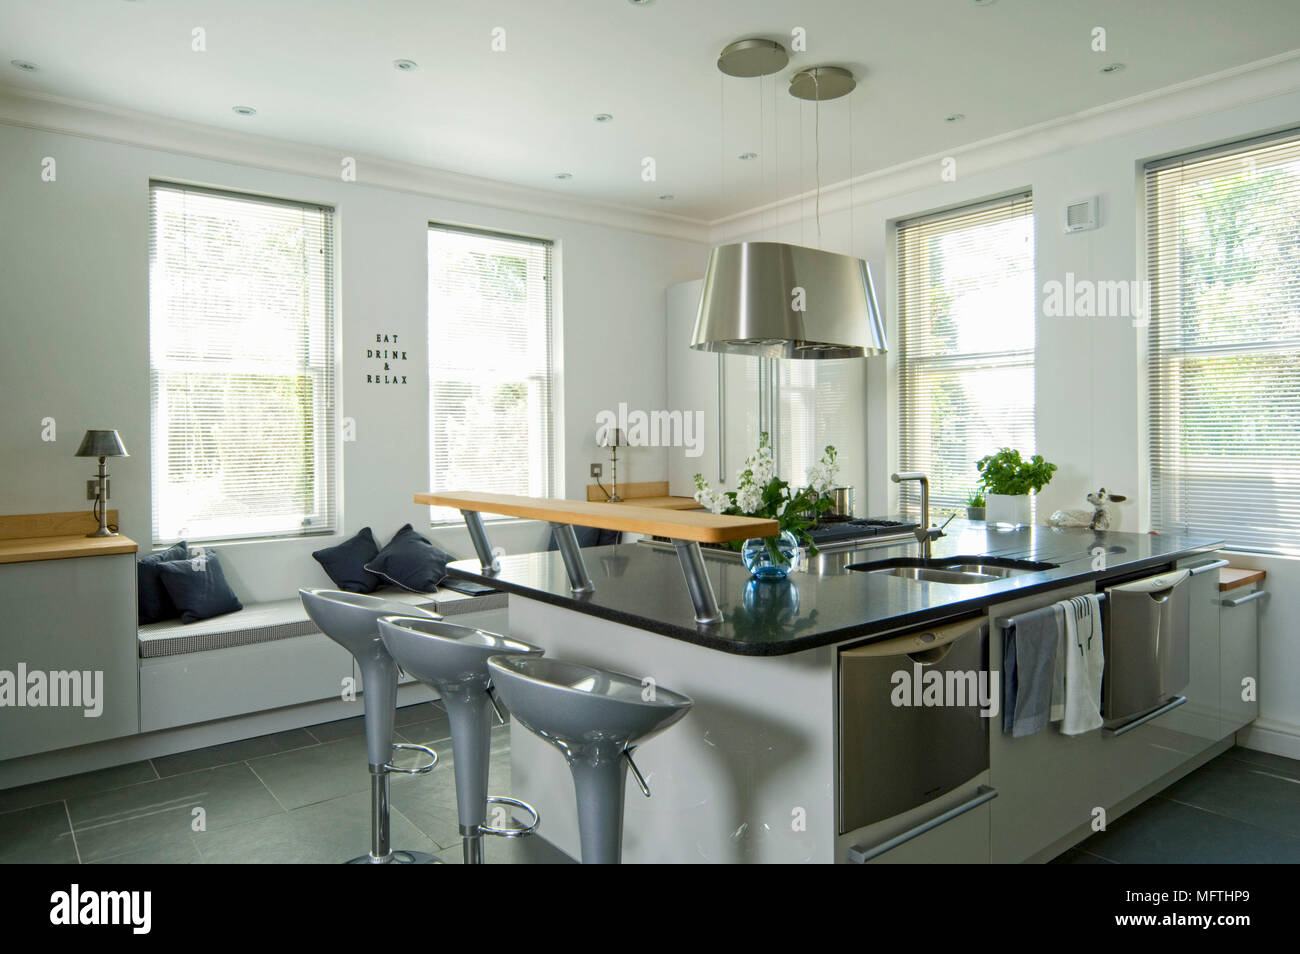 Contemporary kitchen with central island breakfast bar Stock Photo